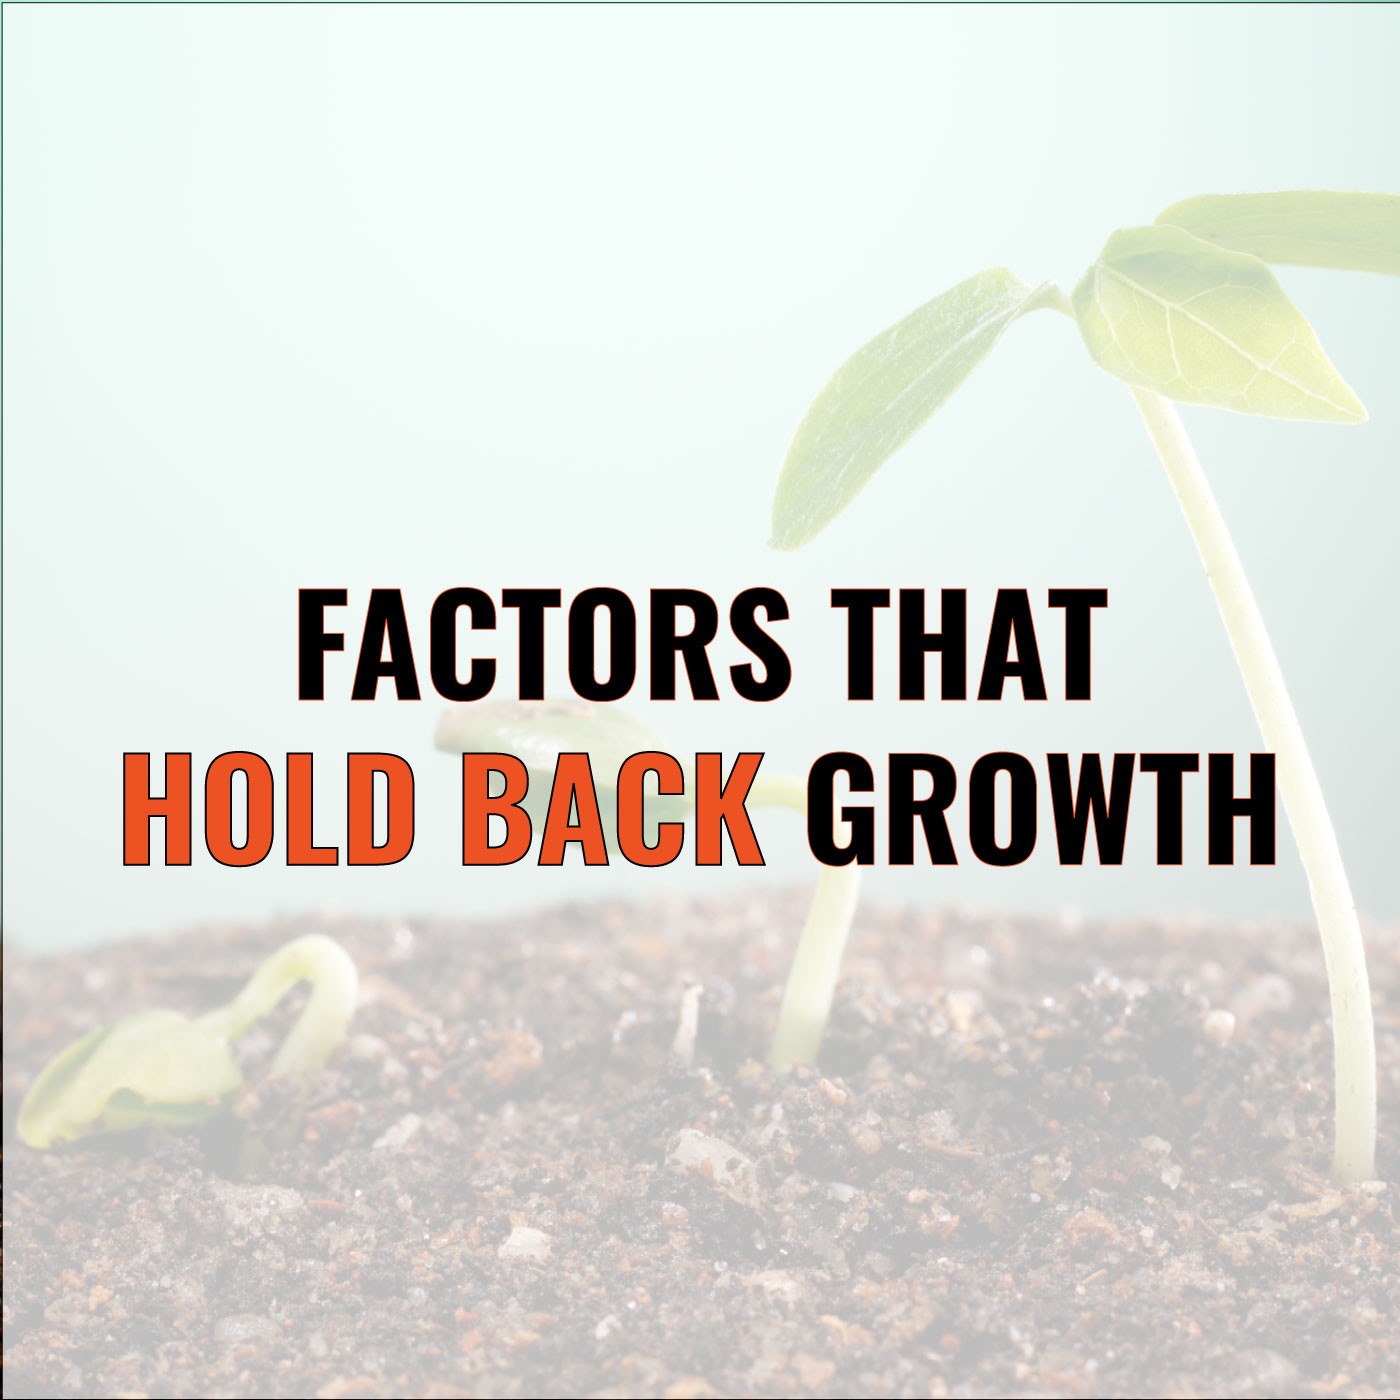 Episode 70: Jonathan David Lewis on Factors That Hold Back Growth